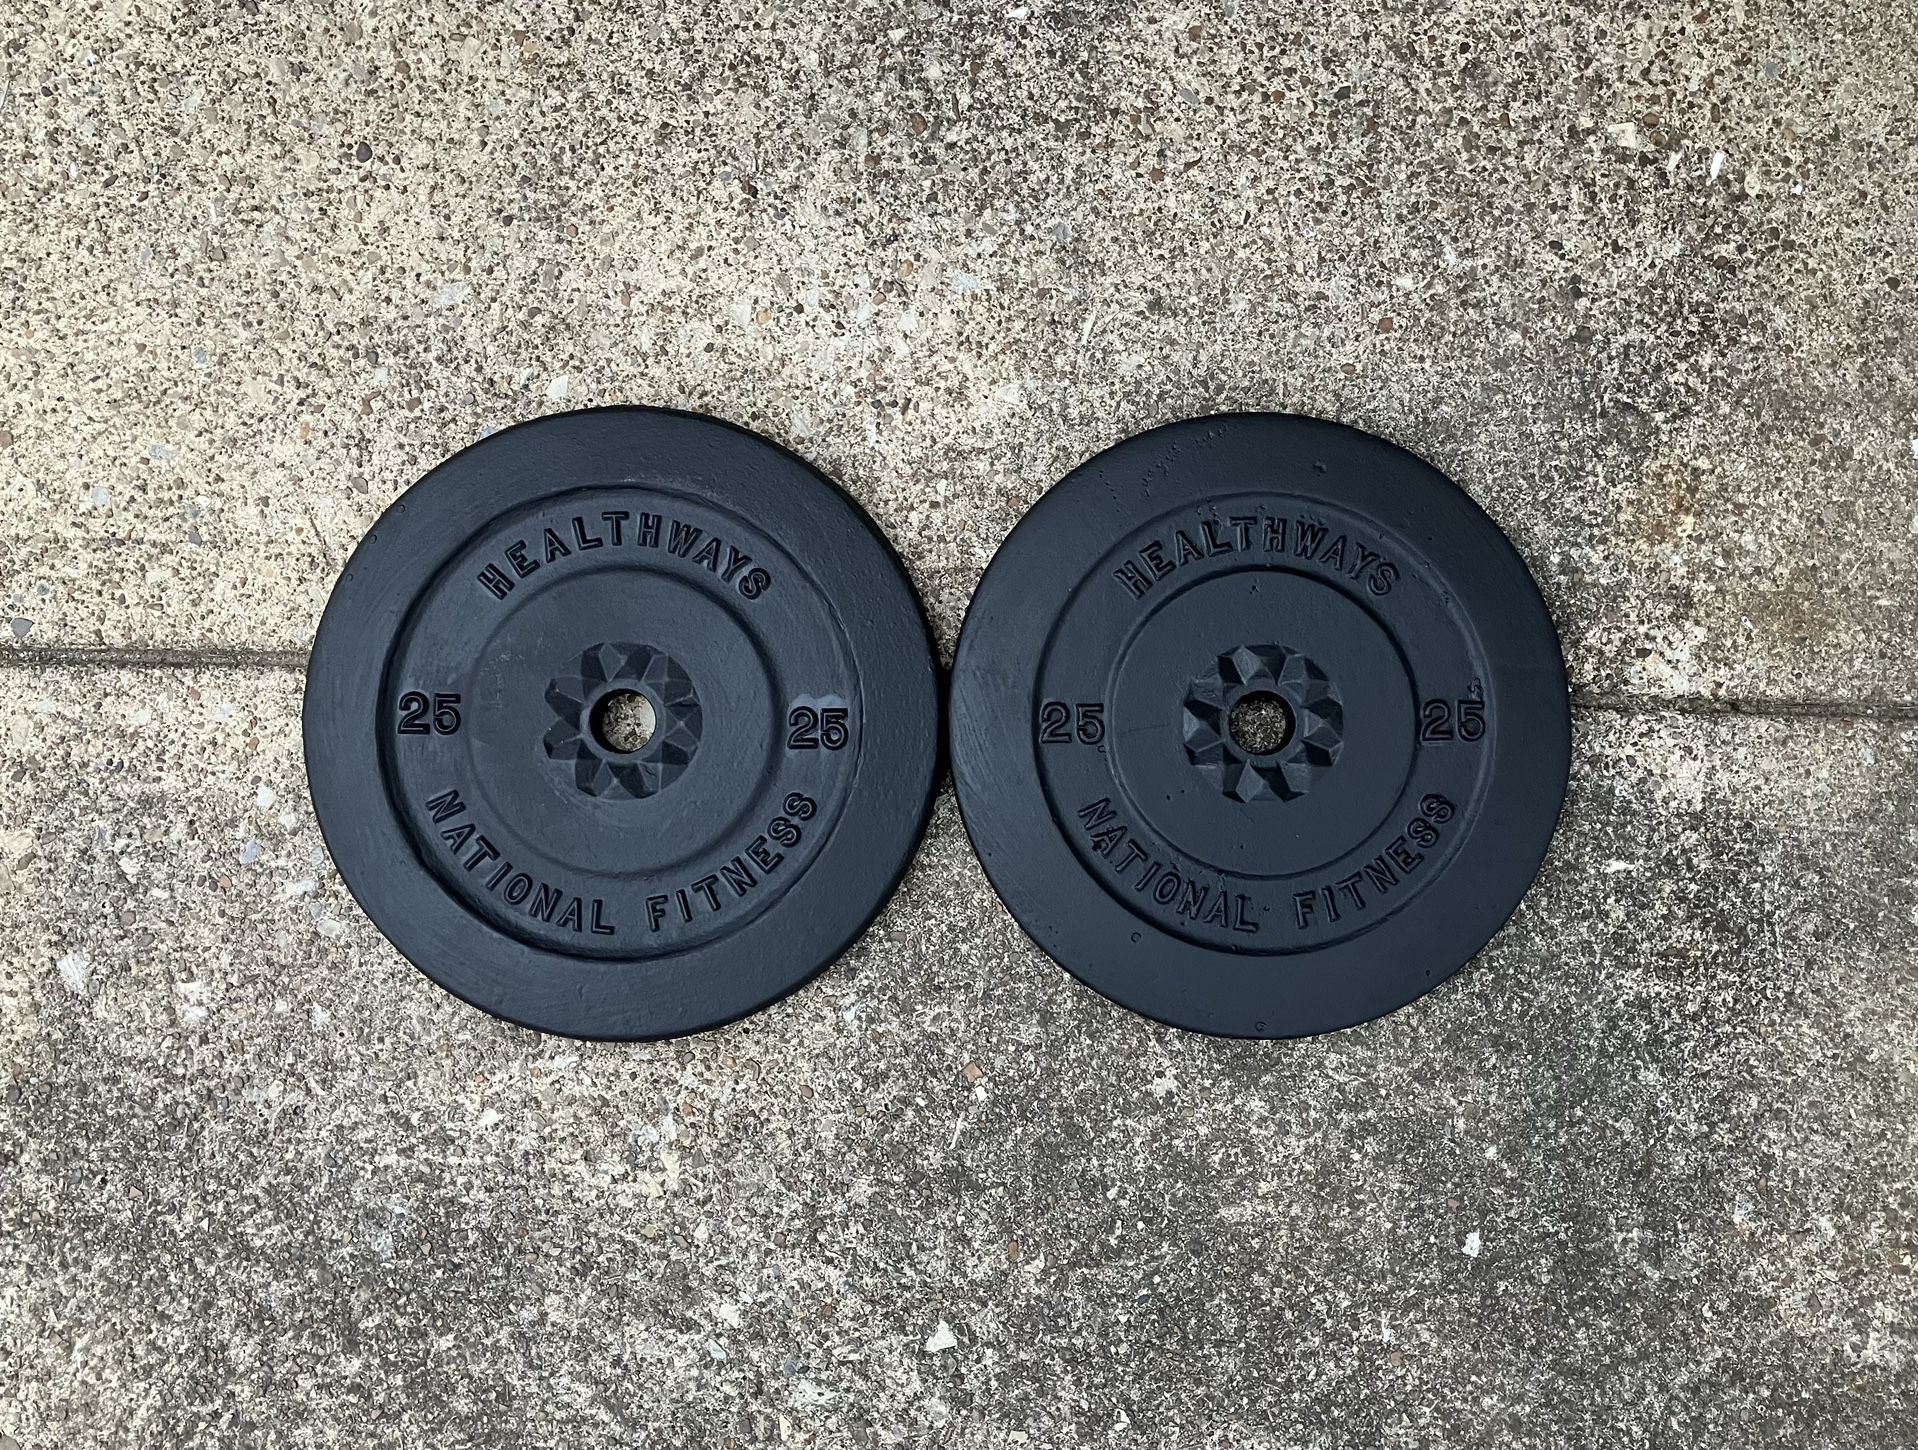 25lb Standard 1” weight plates weights plate 25 lb lbs 25lbs 50lbs total for Barbell bar